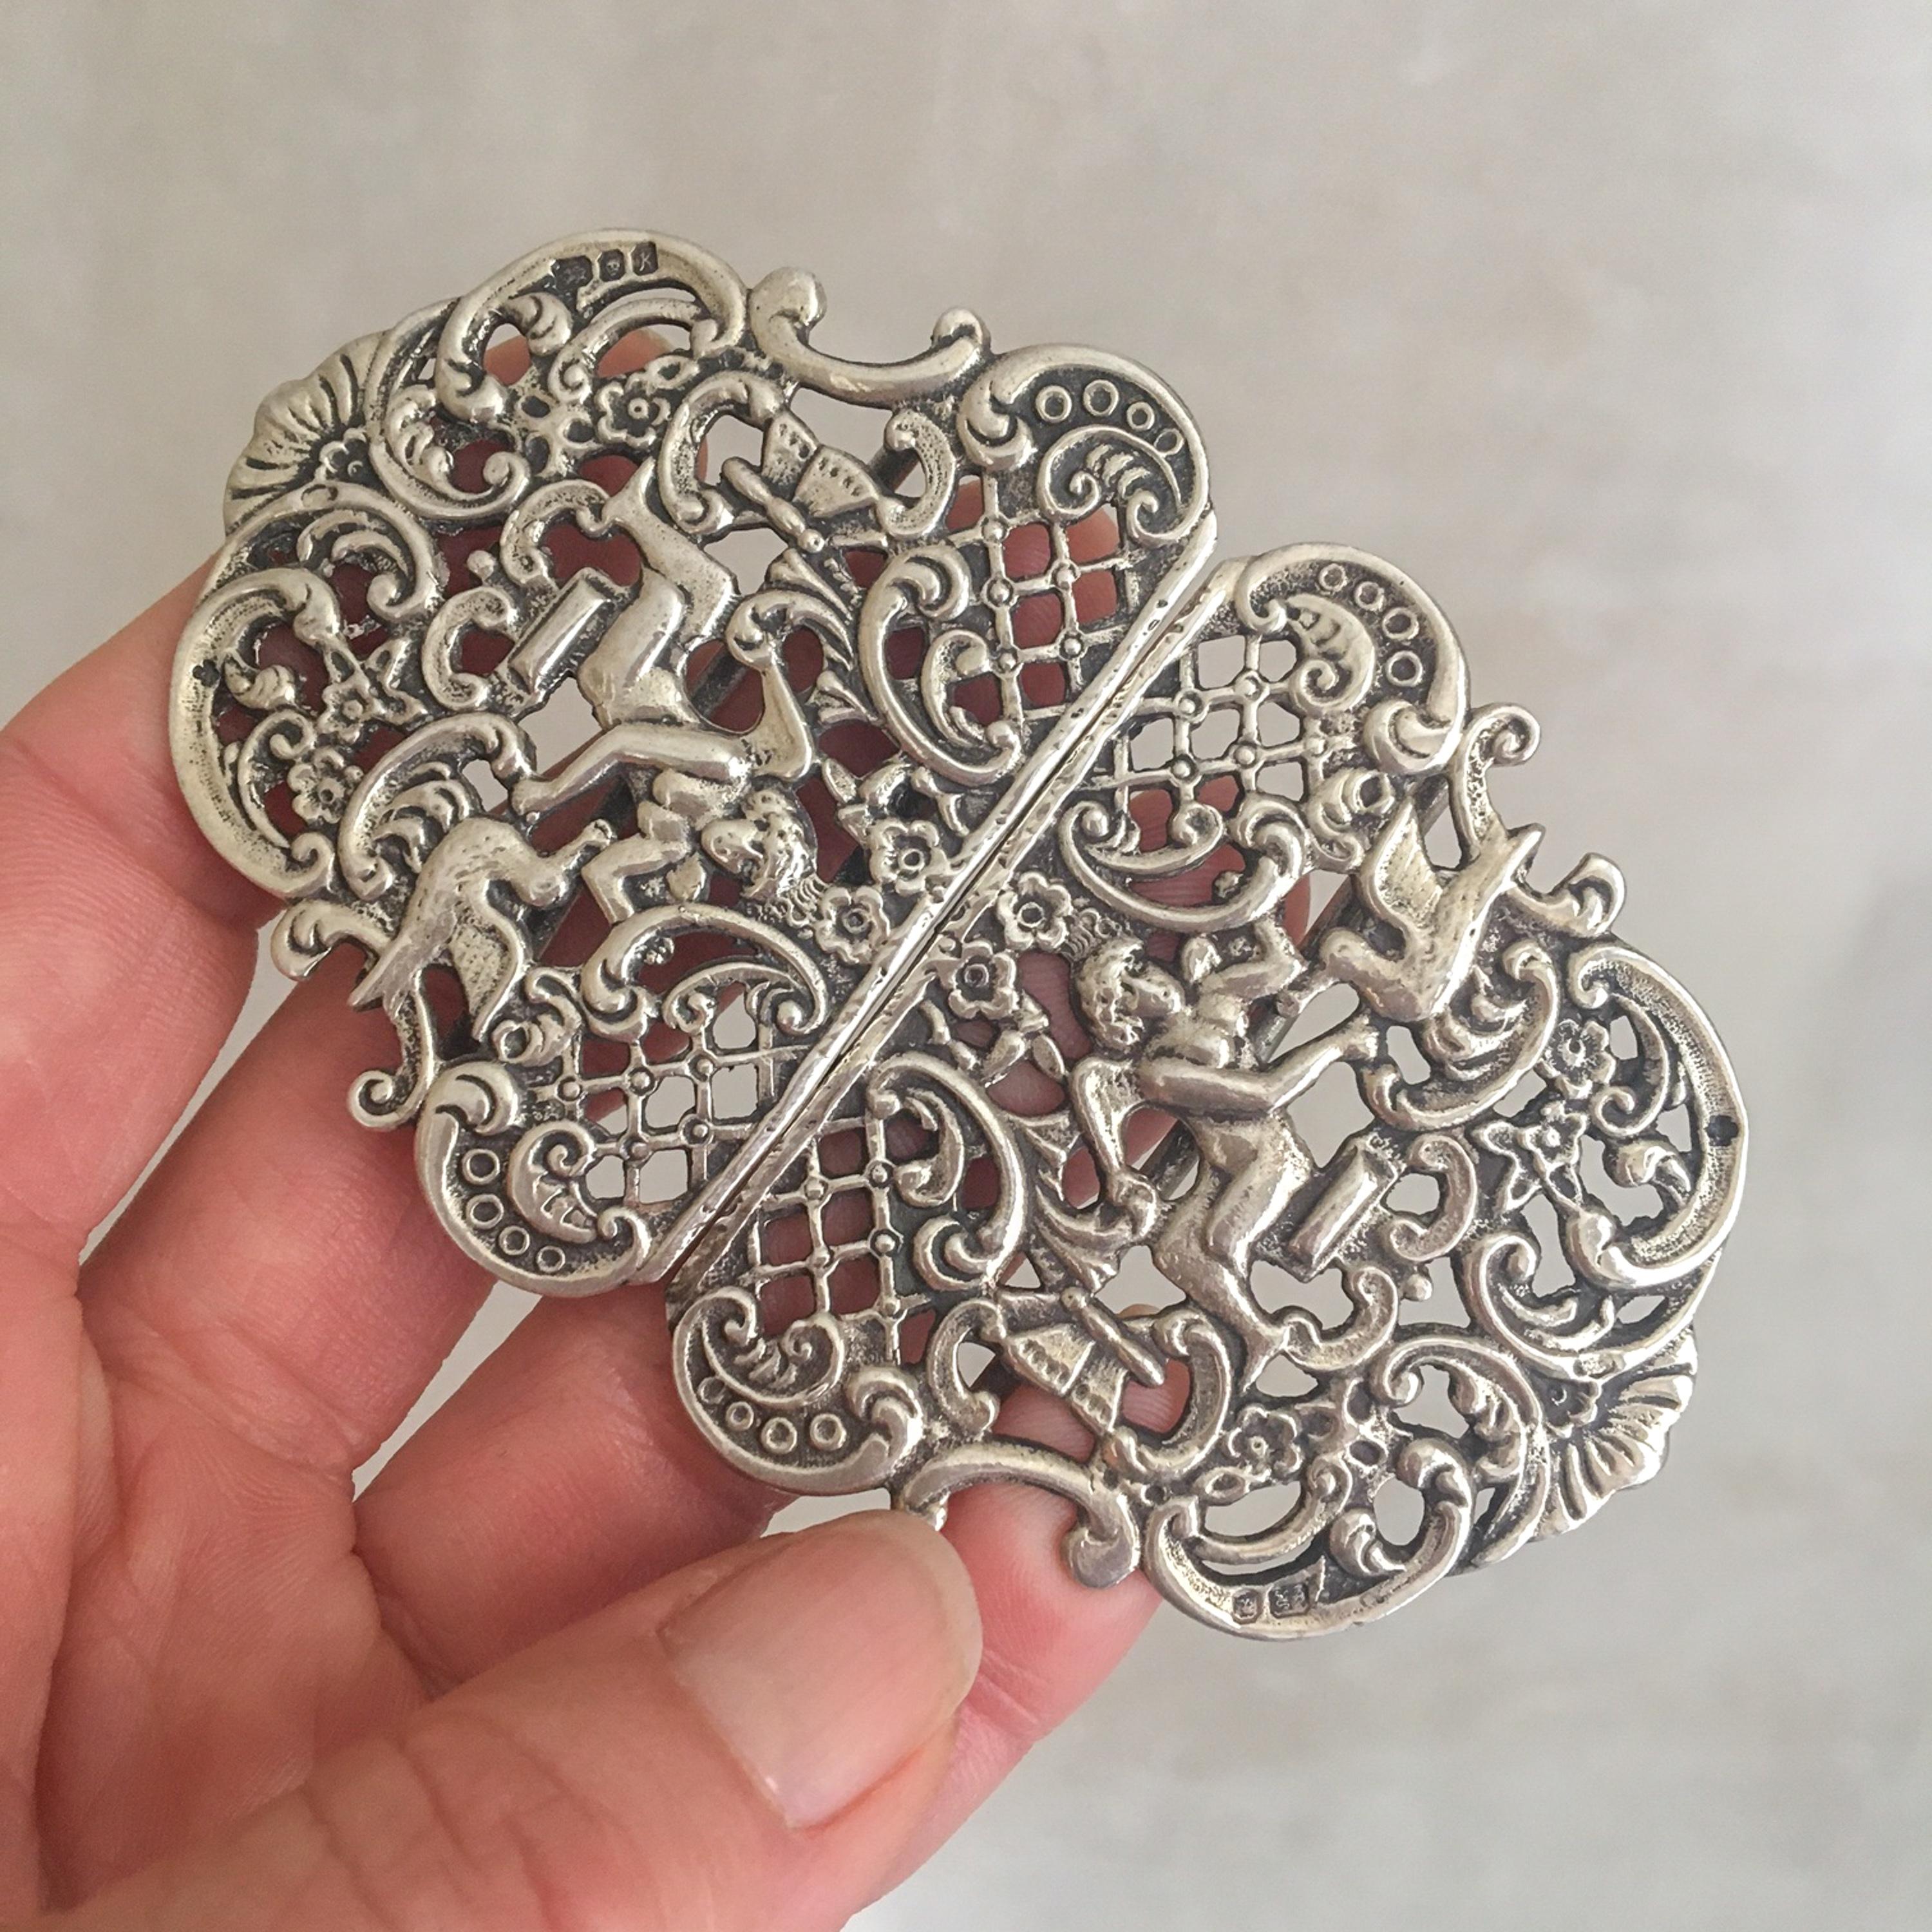 Nurses buckle made out of sterling silver which shows a beautiful opulent presentation. The belt buckle has a scrolling openwork design, depicting a bird with winged angels. The buckle is stamped with full London Hallmarks, Lion, Leopard and date